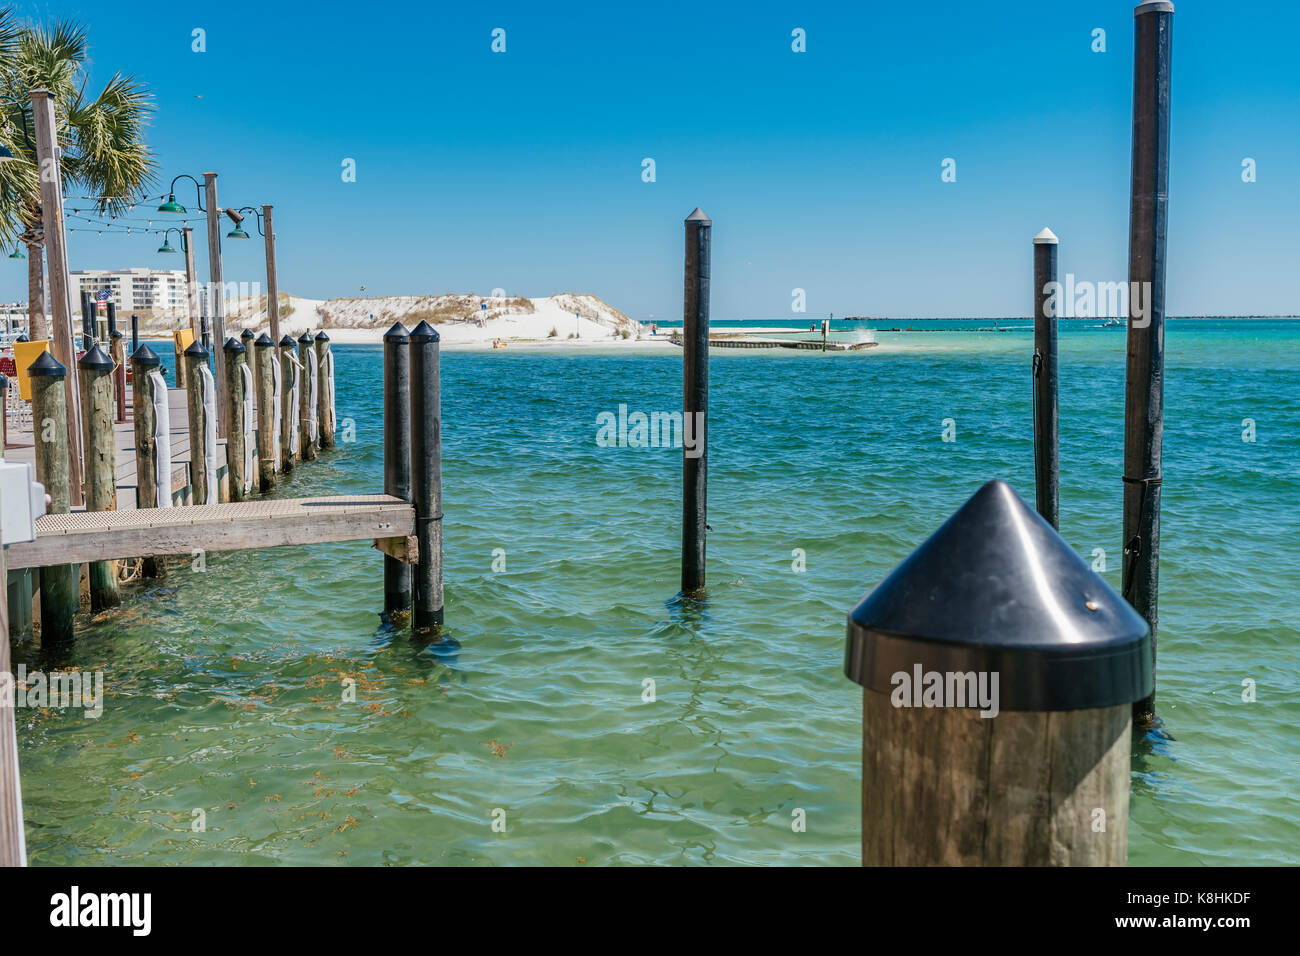 View of East Pass in Destin Florida from Harry T's restaurant at Harborwalk Marina. Stock Photo